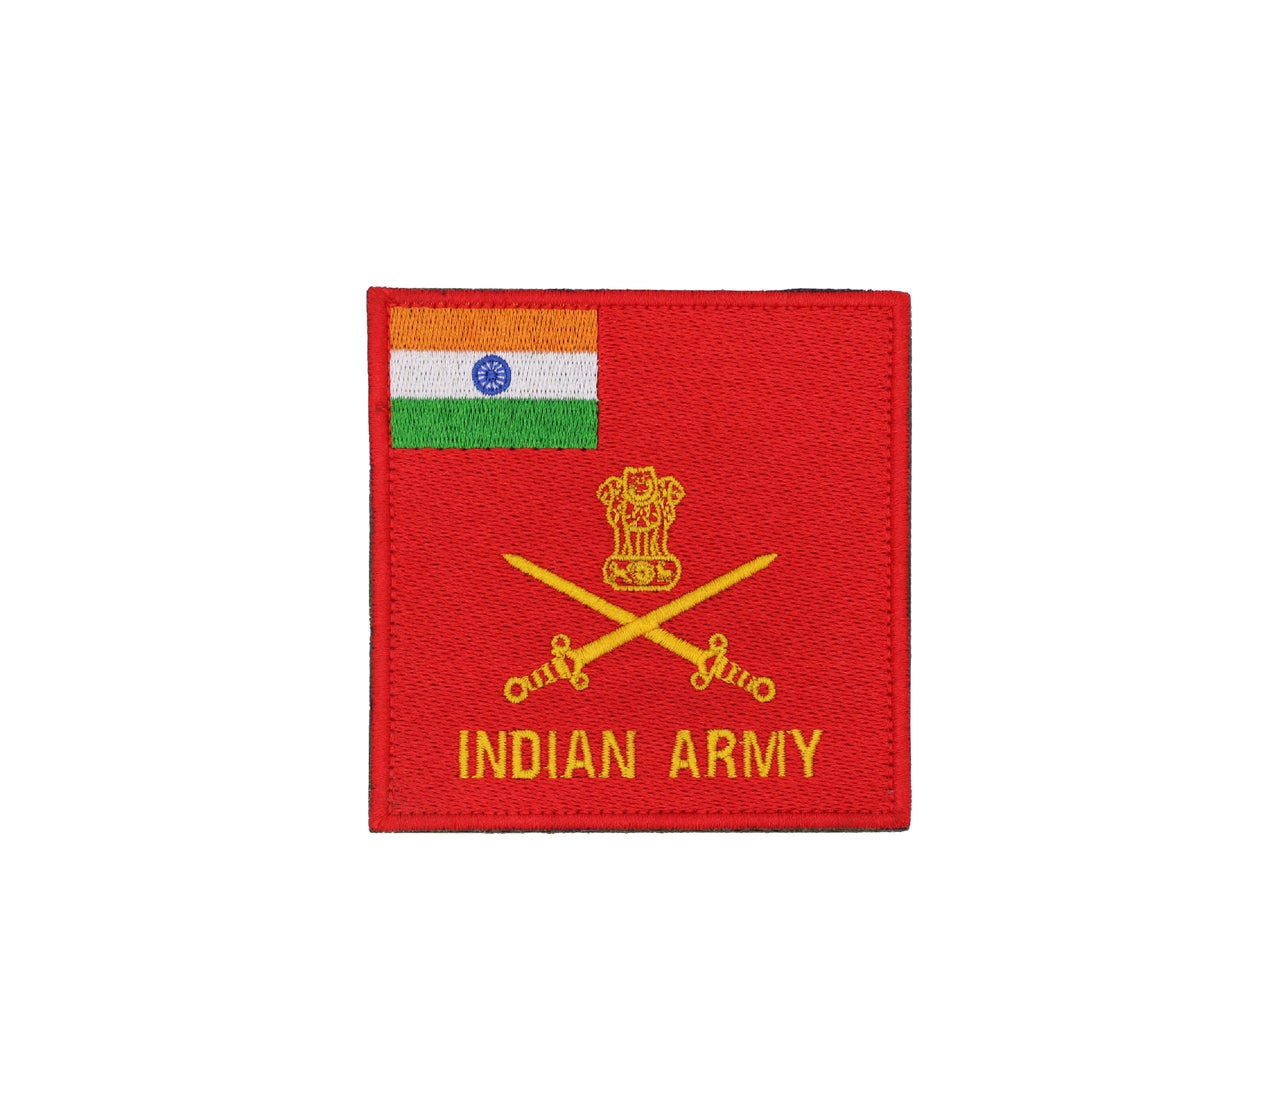 Indian Army Flag Patch - 3.5 x 3.5 Inches